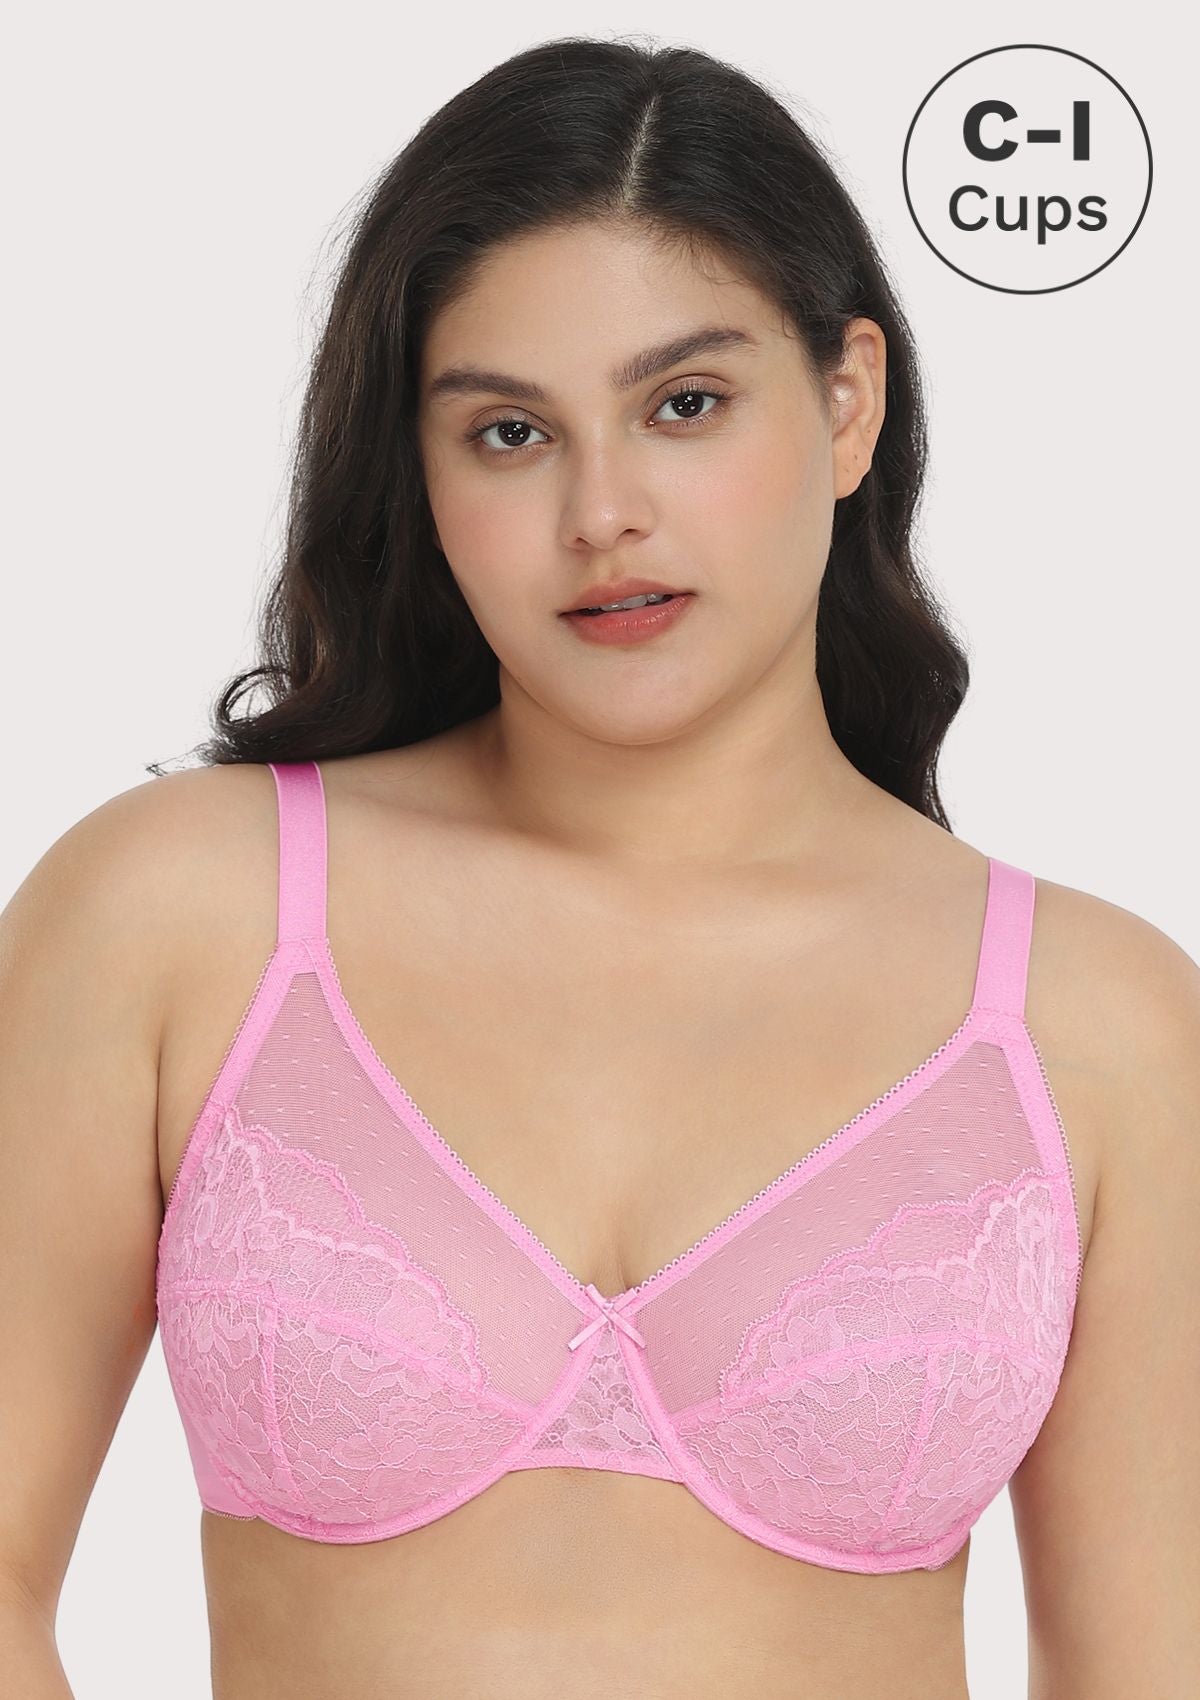 HSIA Enchante Lacy Bra: Comfy Sheer Lace Bra With Lift - Dusty Peach / 44 / C